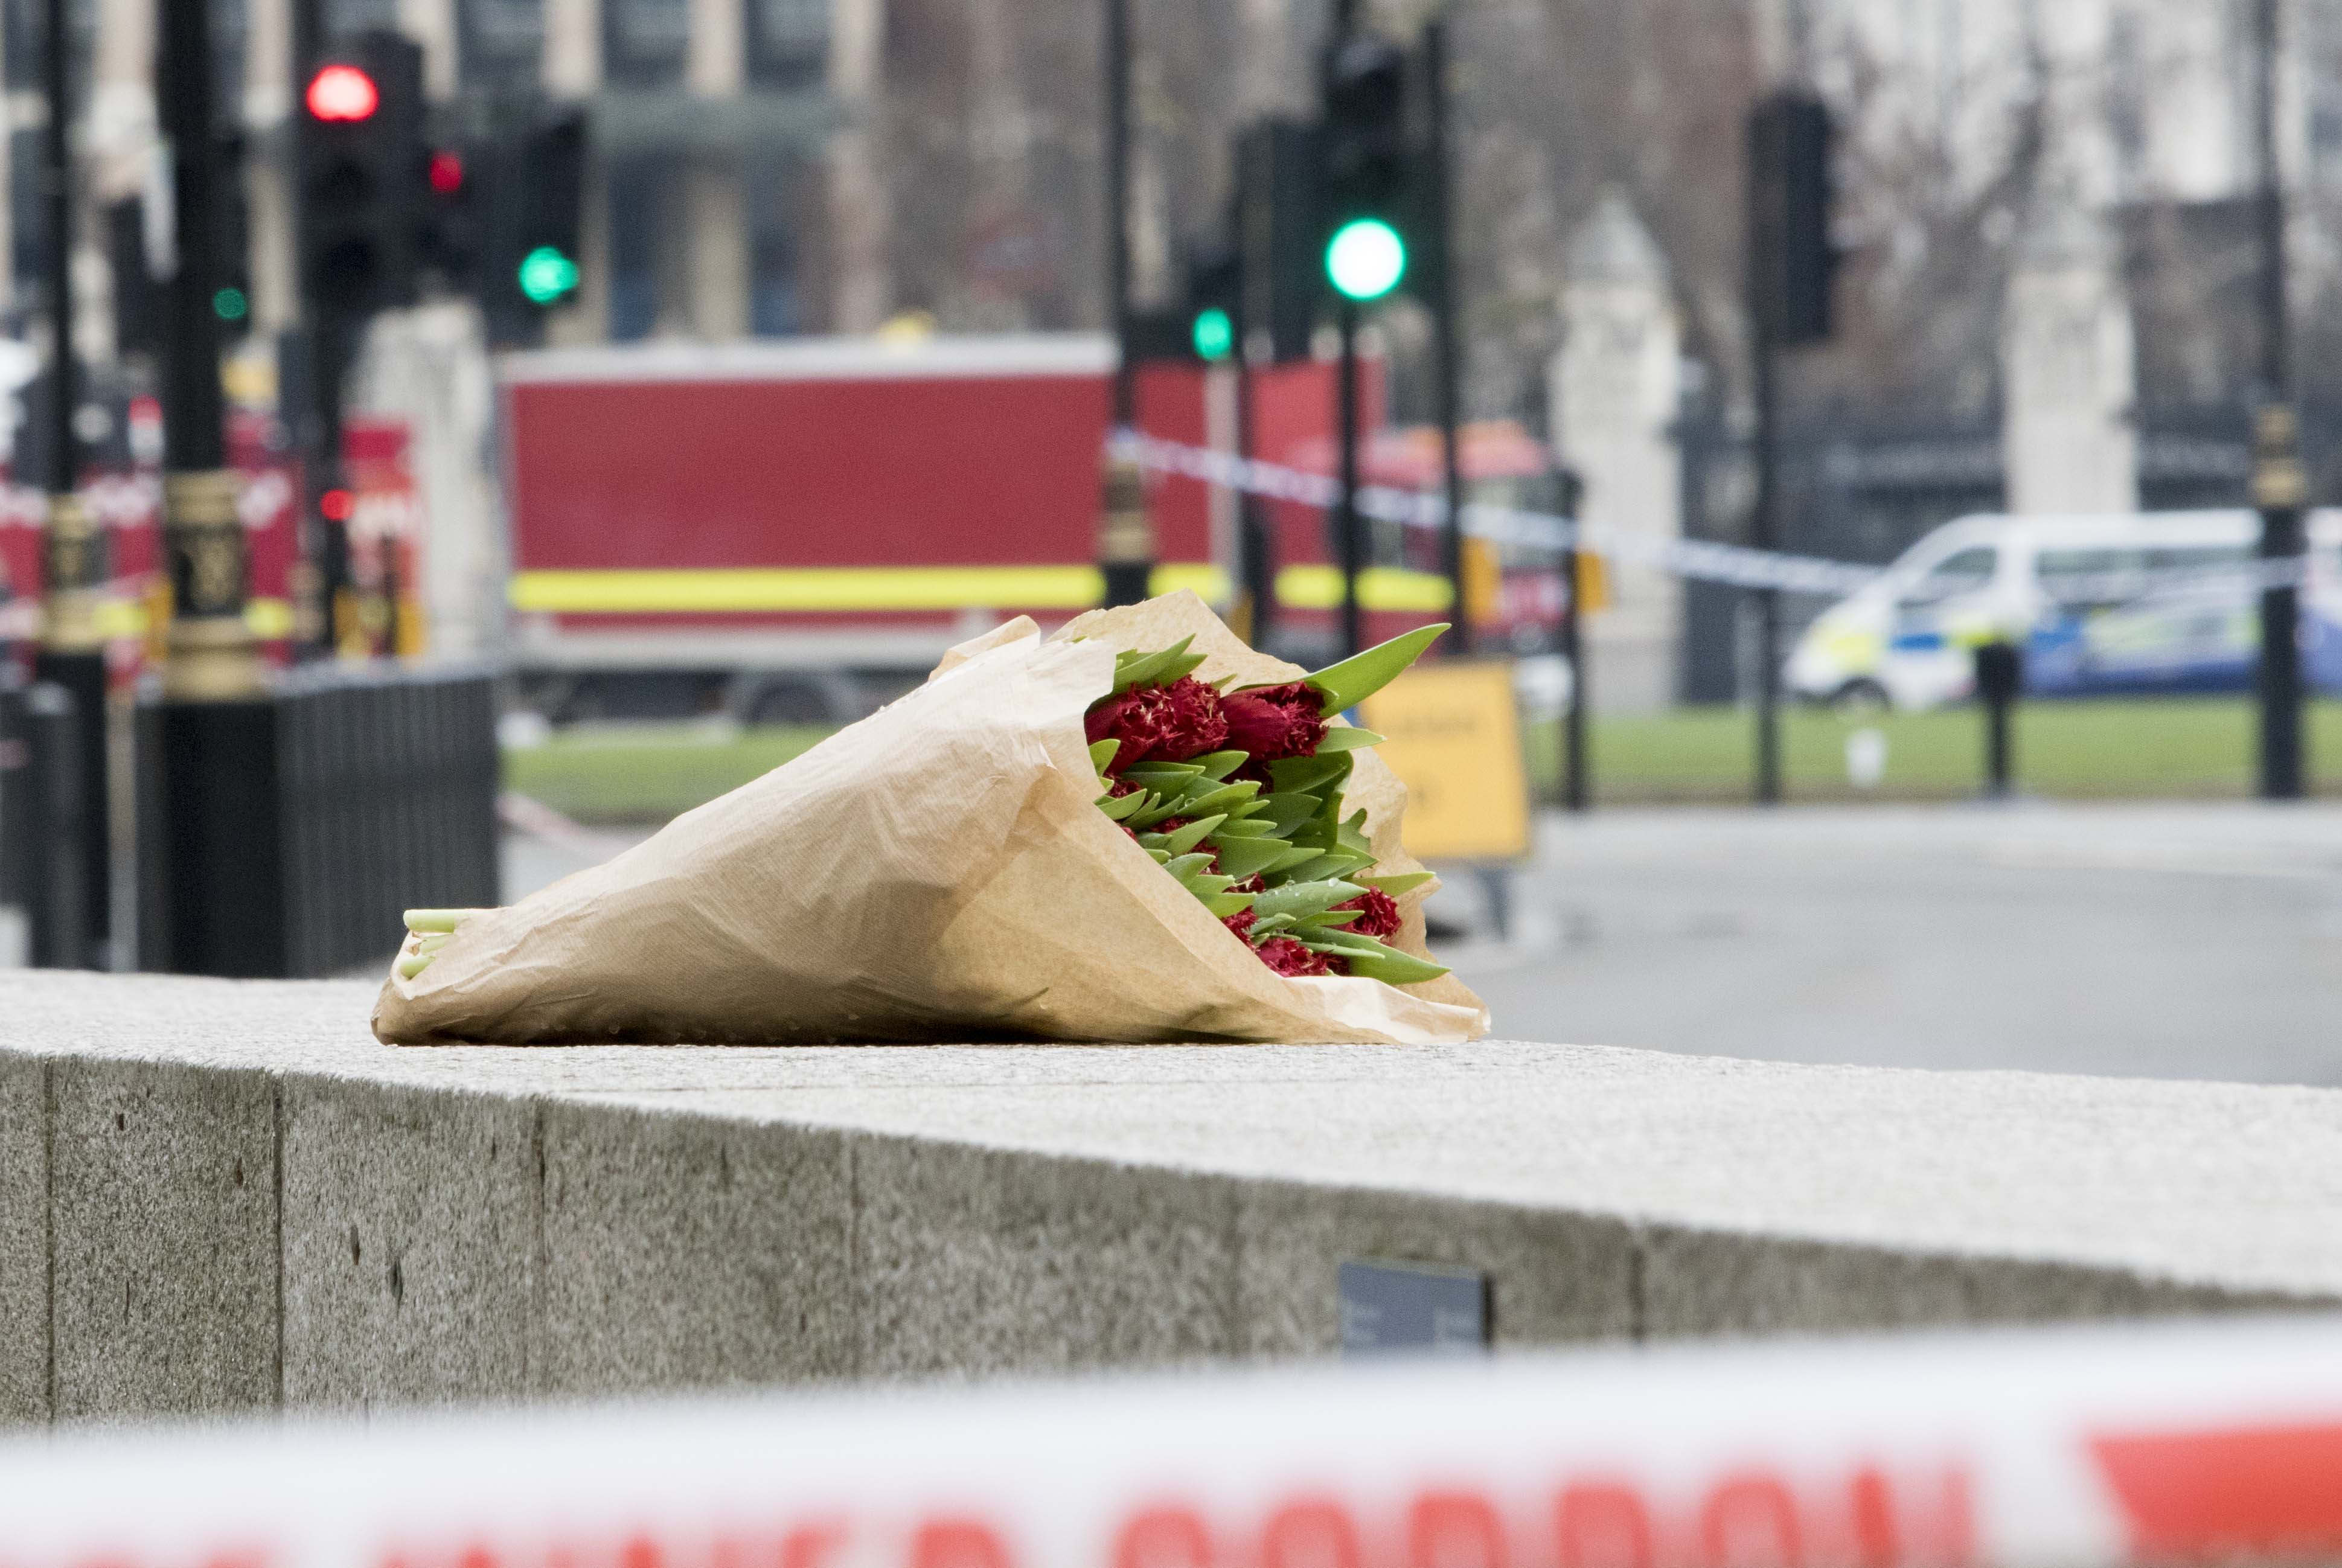 Islamic State Claims Responsibility For London Car, Knife Attack - TPM ...